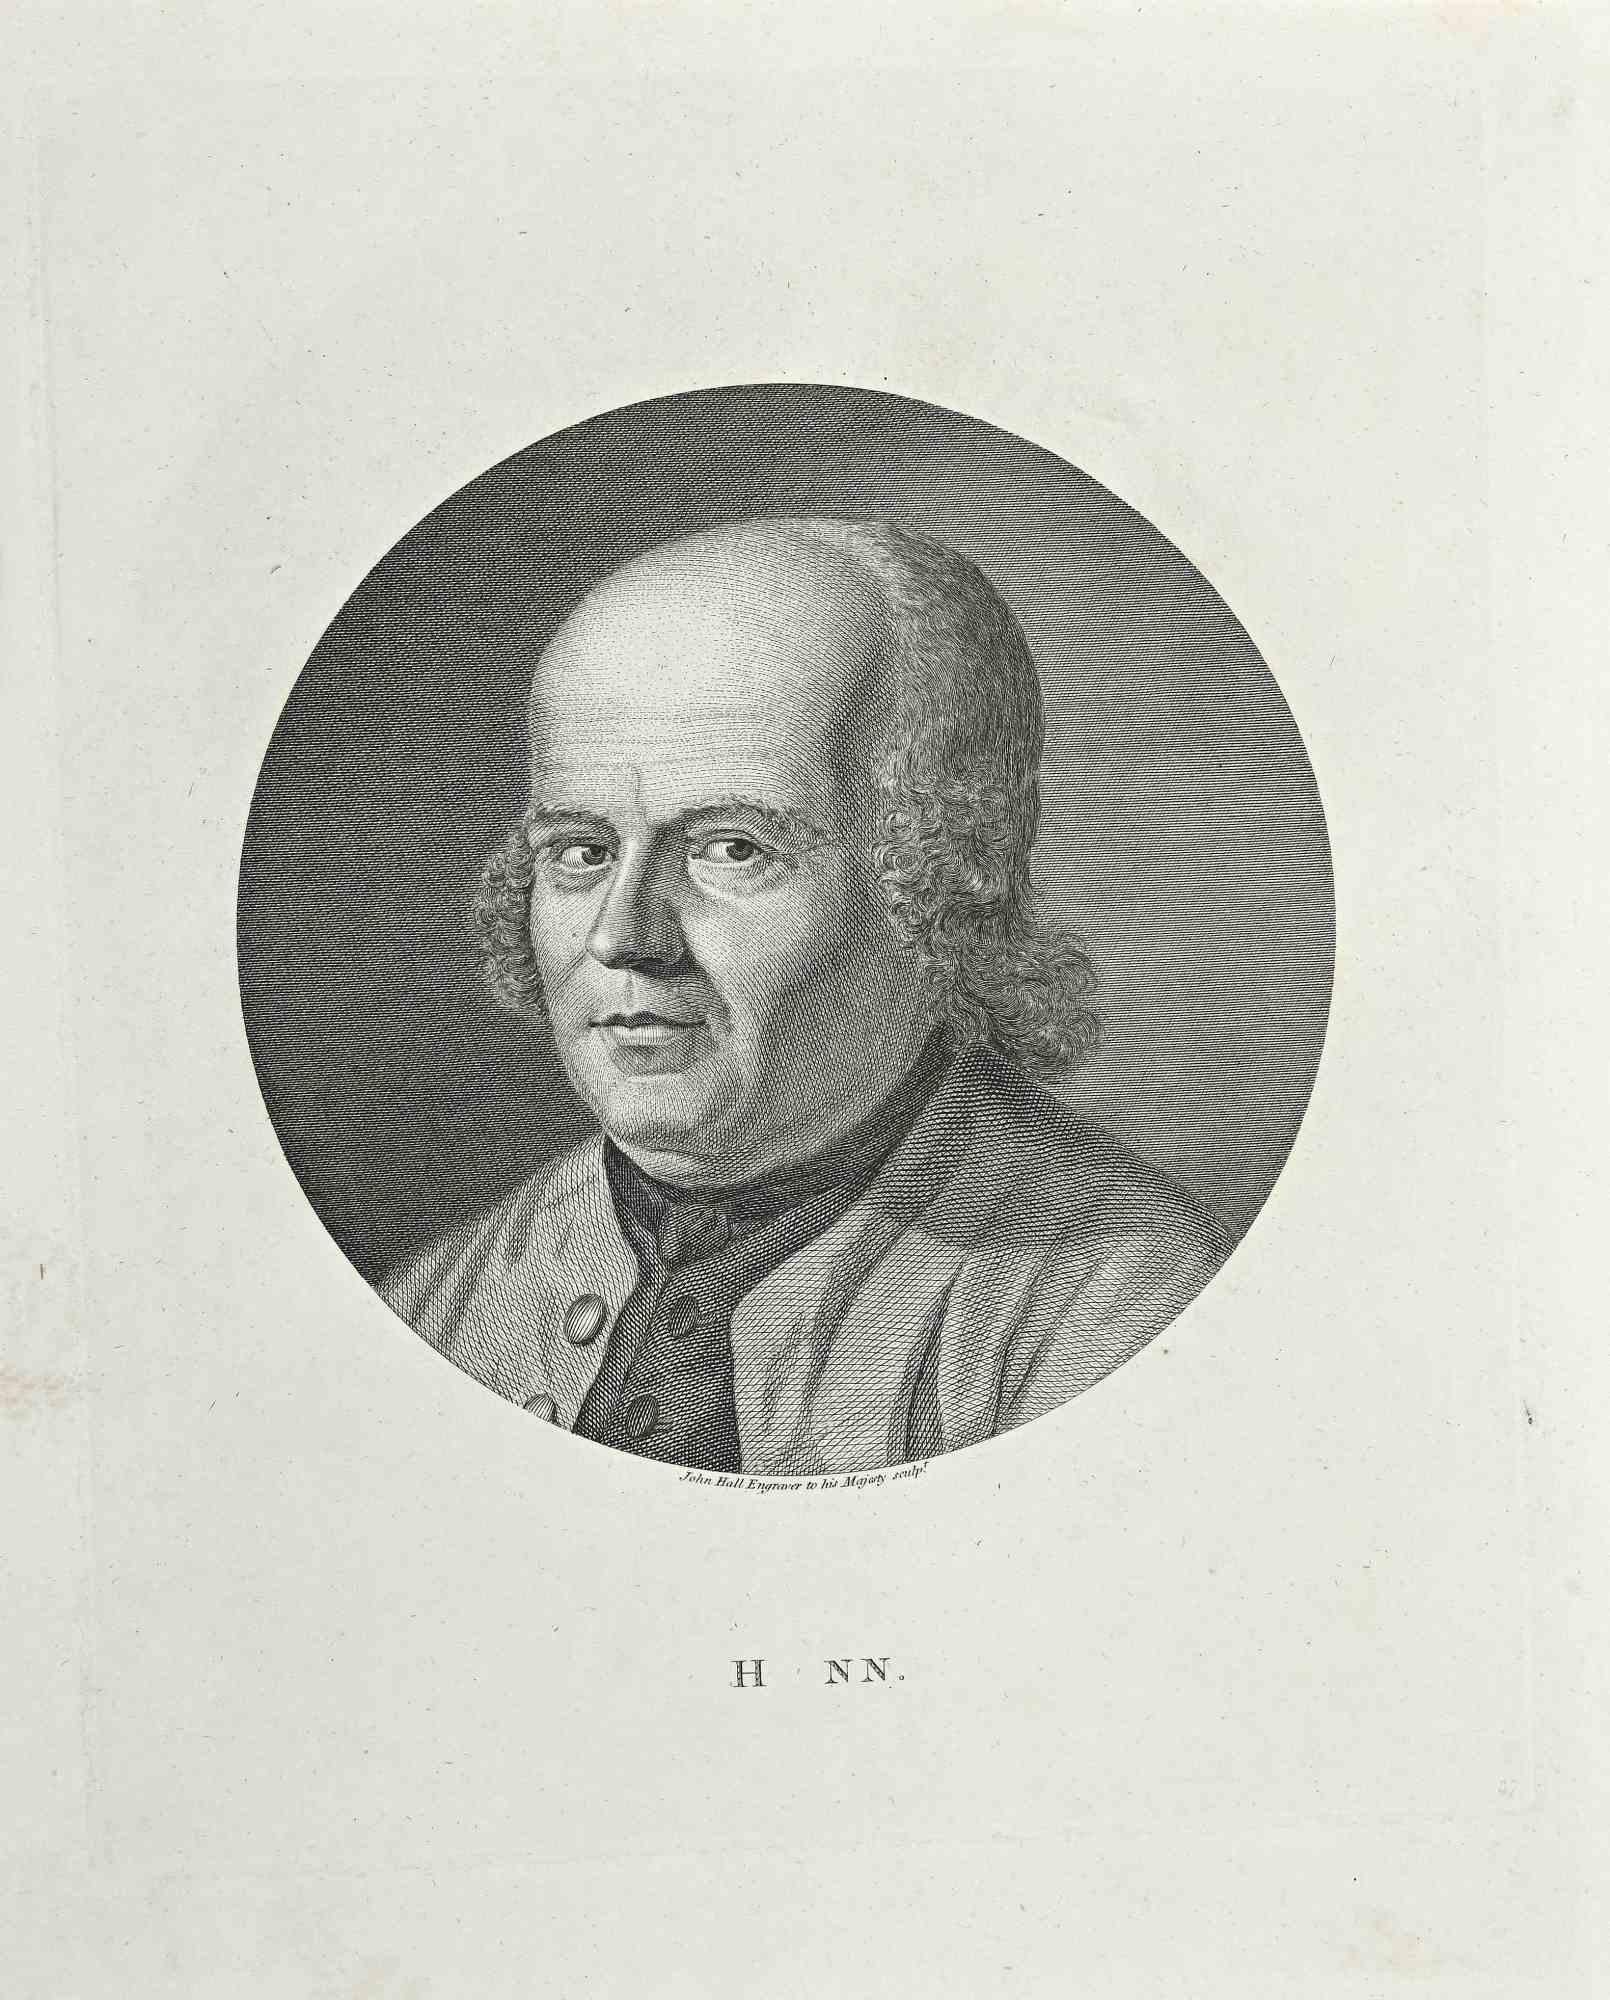 Portrait of H. NN. is an original artwork realized after John Hall (1739 - 1797).

Original Etching from J.C. Lavater's "Essays on Physiognomy, Designed to promote the Knowledge and the Love of Mankind", London, Bensley, 1810. 

A the bottom center